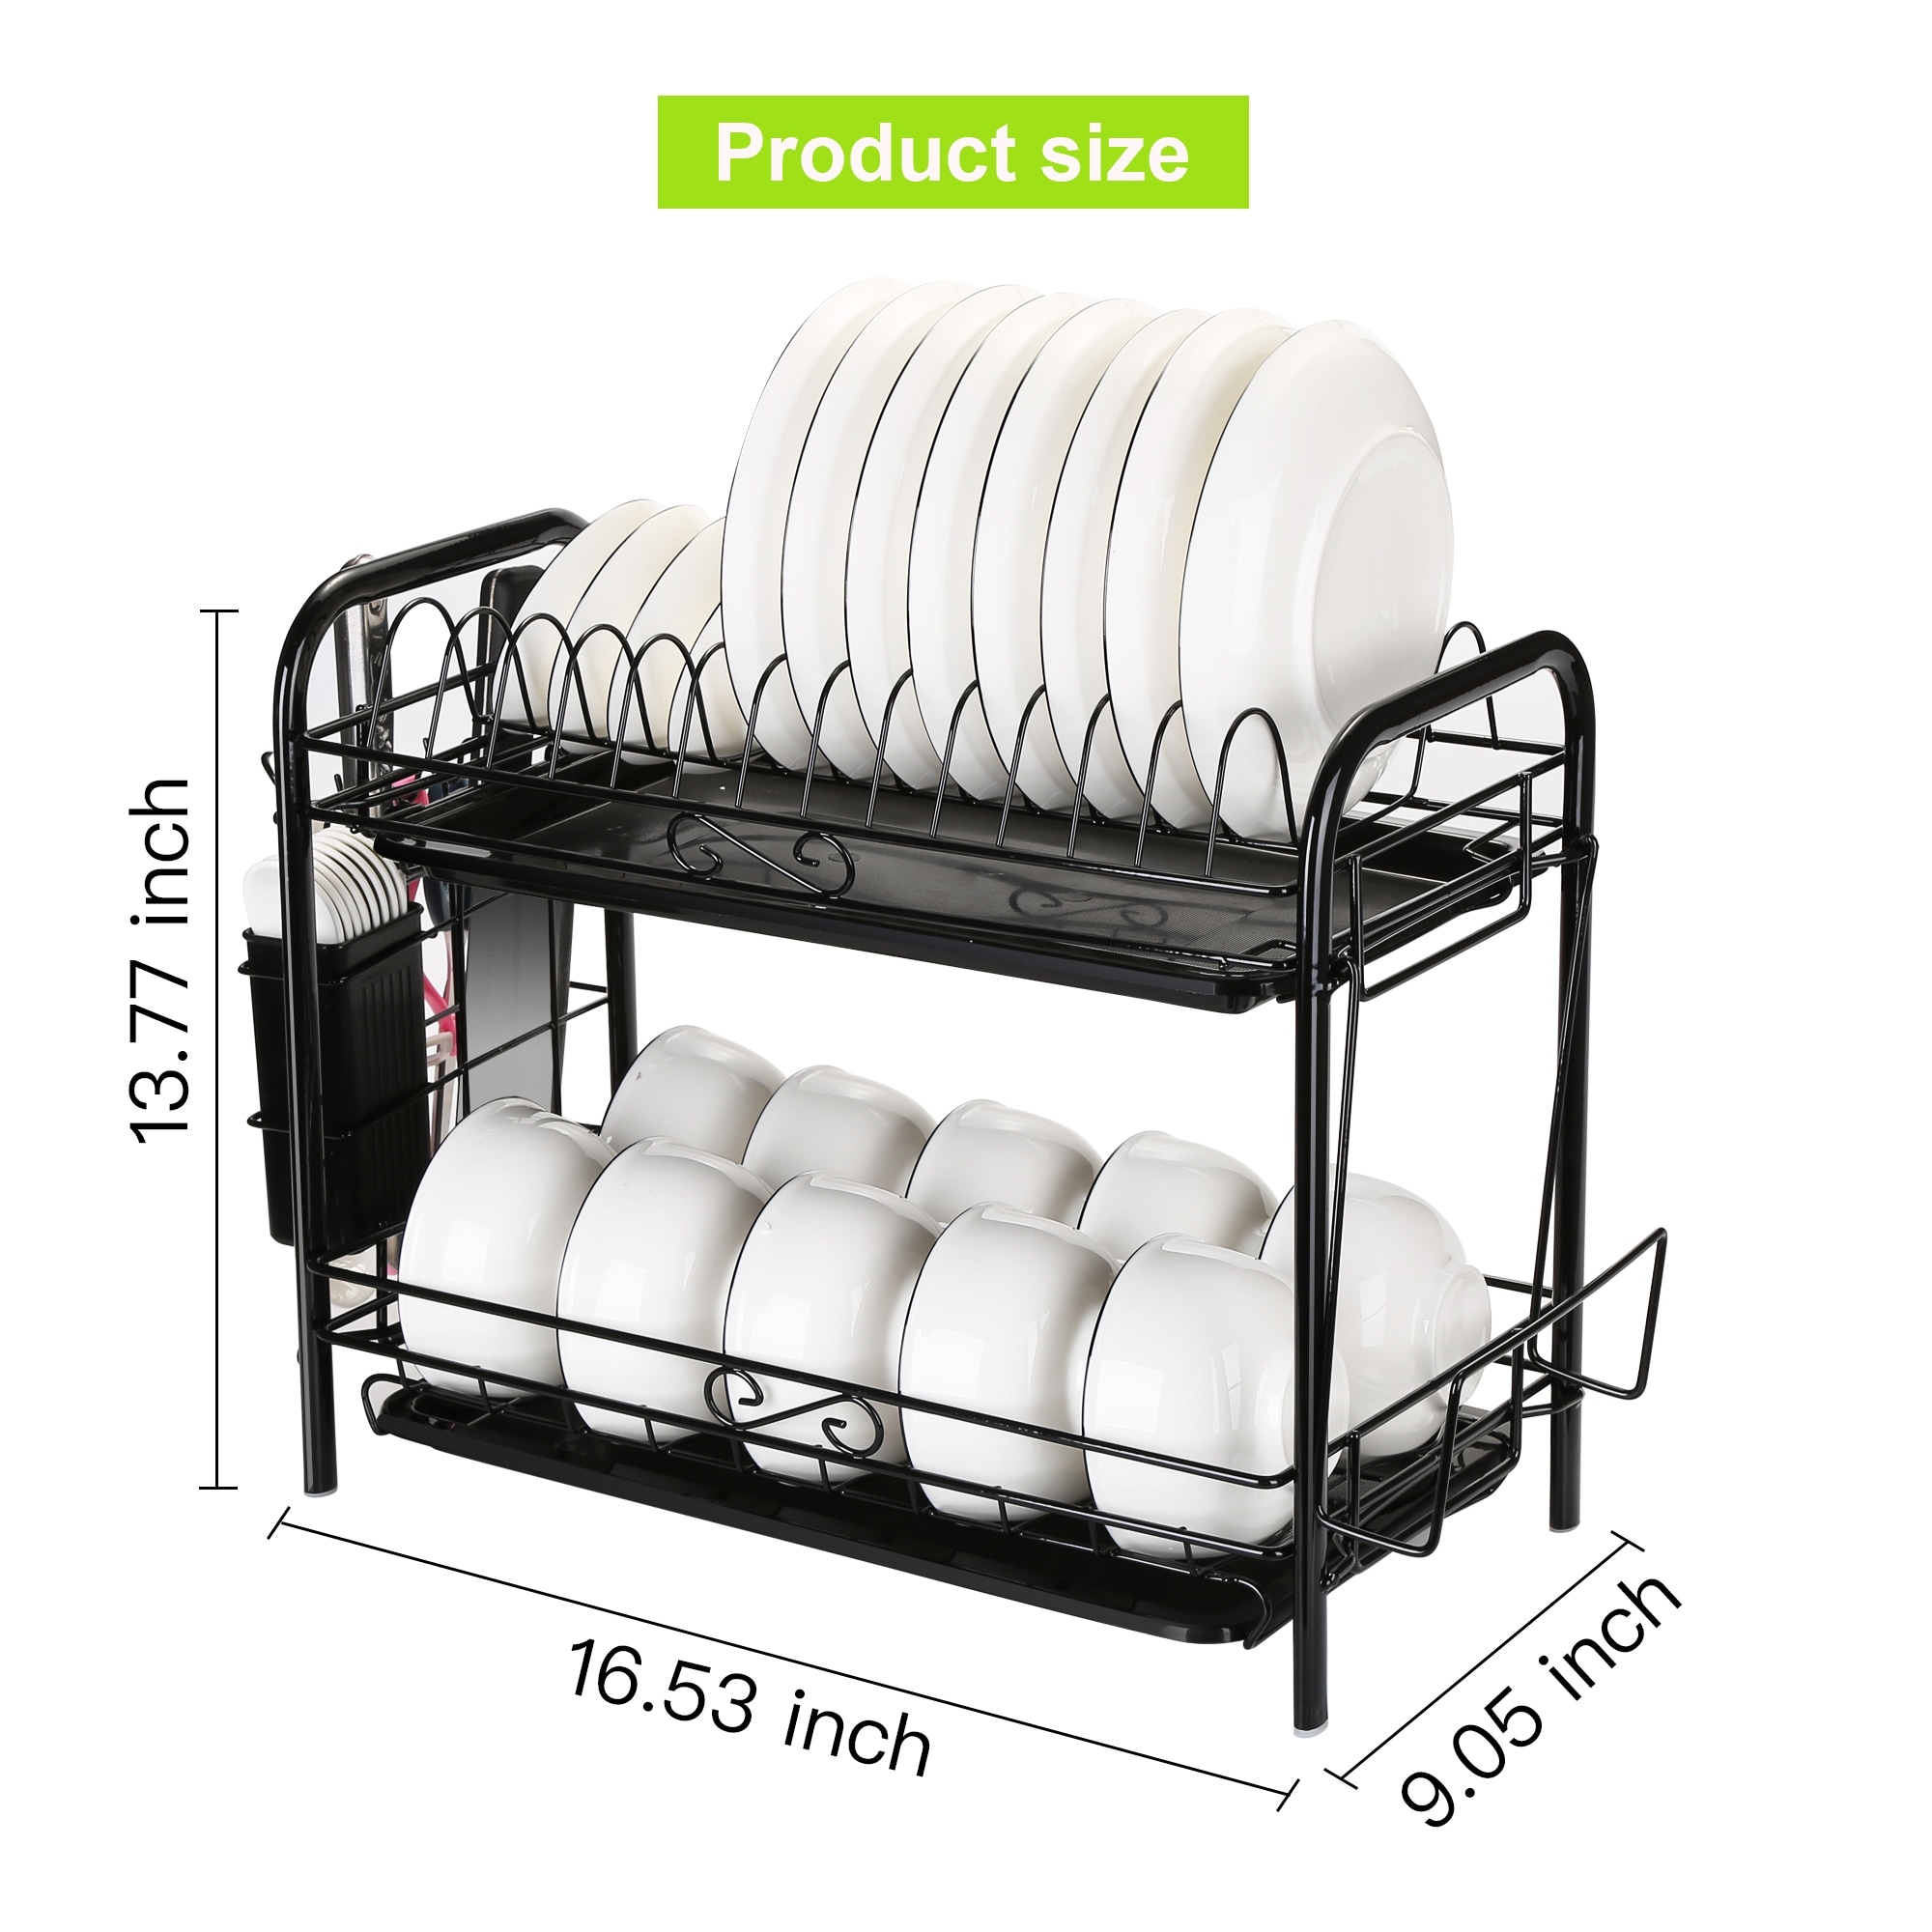 Dish Drying Rack iSPECLE 2 Tier Dish Rack with Utensil Holder Cutting Board Holder and Dish Drainer for Kitchen Counter Top Plated Chrome Dish Dryer Silver 17.0 X 9.7 X 14.6 inch 